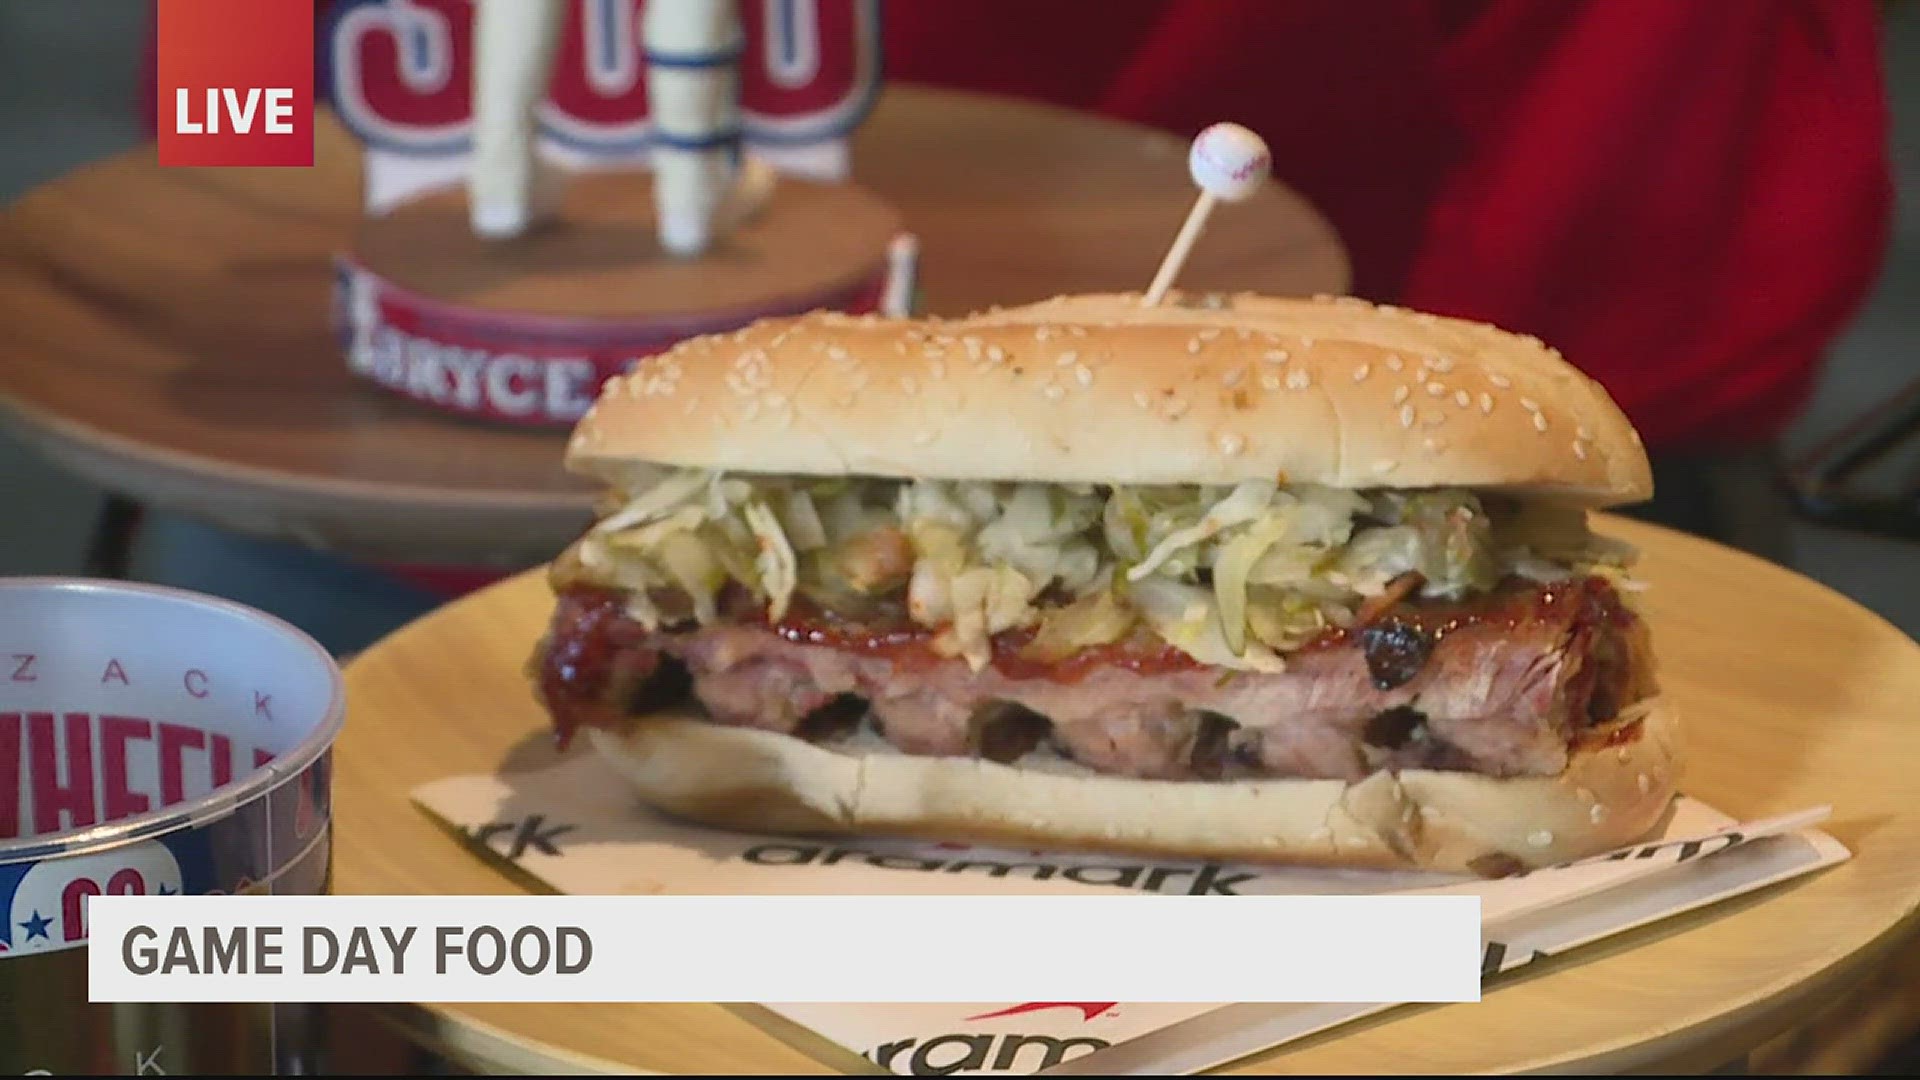 Led by the "Schwarburger 2.0," there are a host of new foods available to enjoy at the Phillies' home ballpark in 2024.